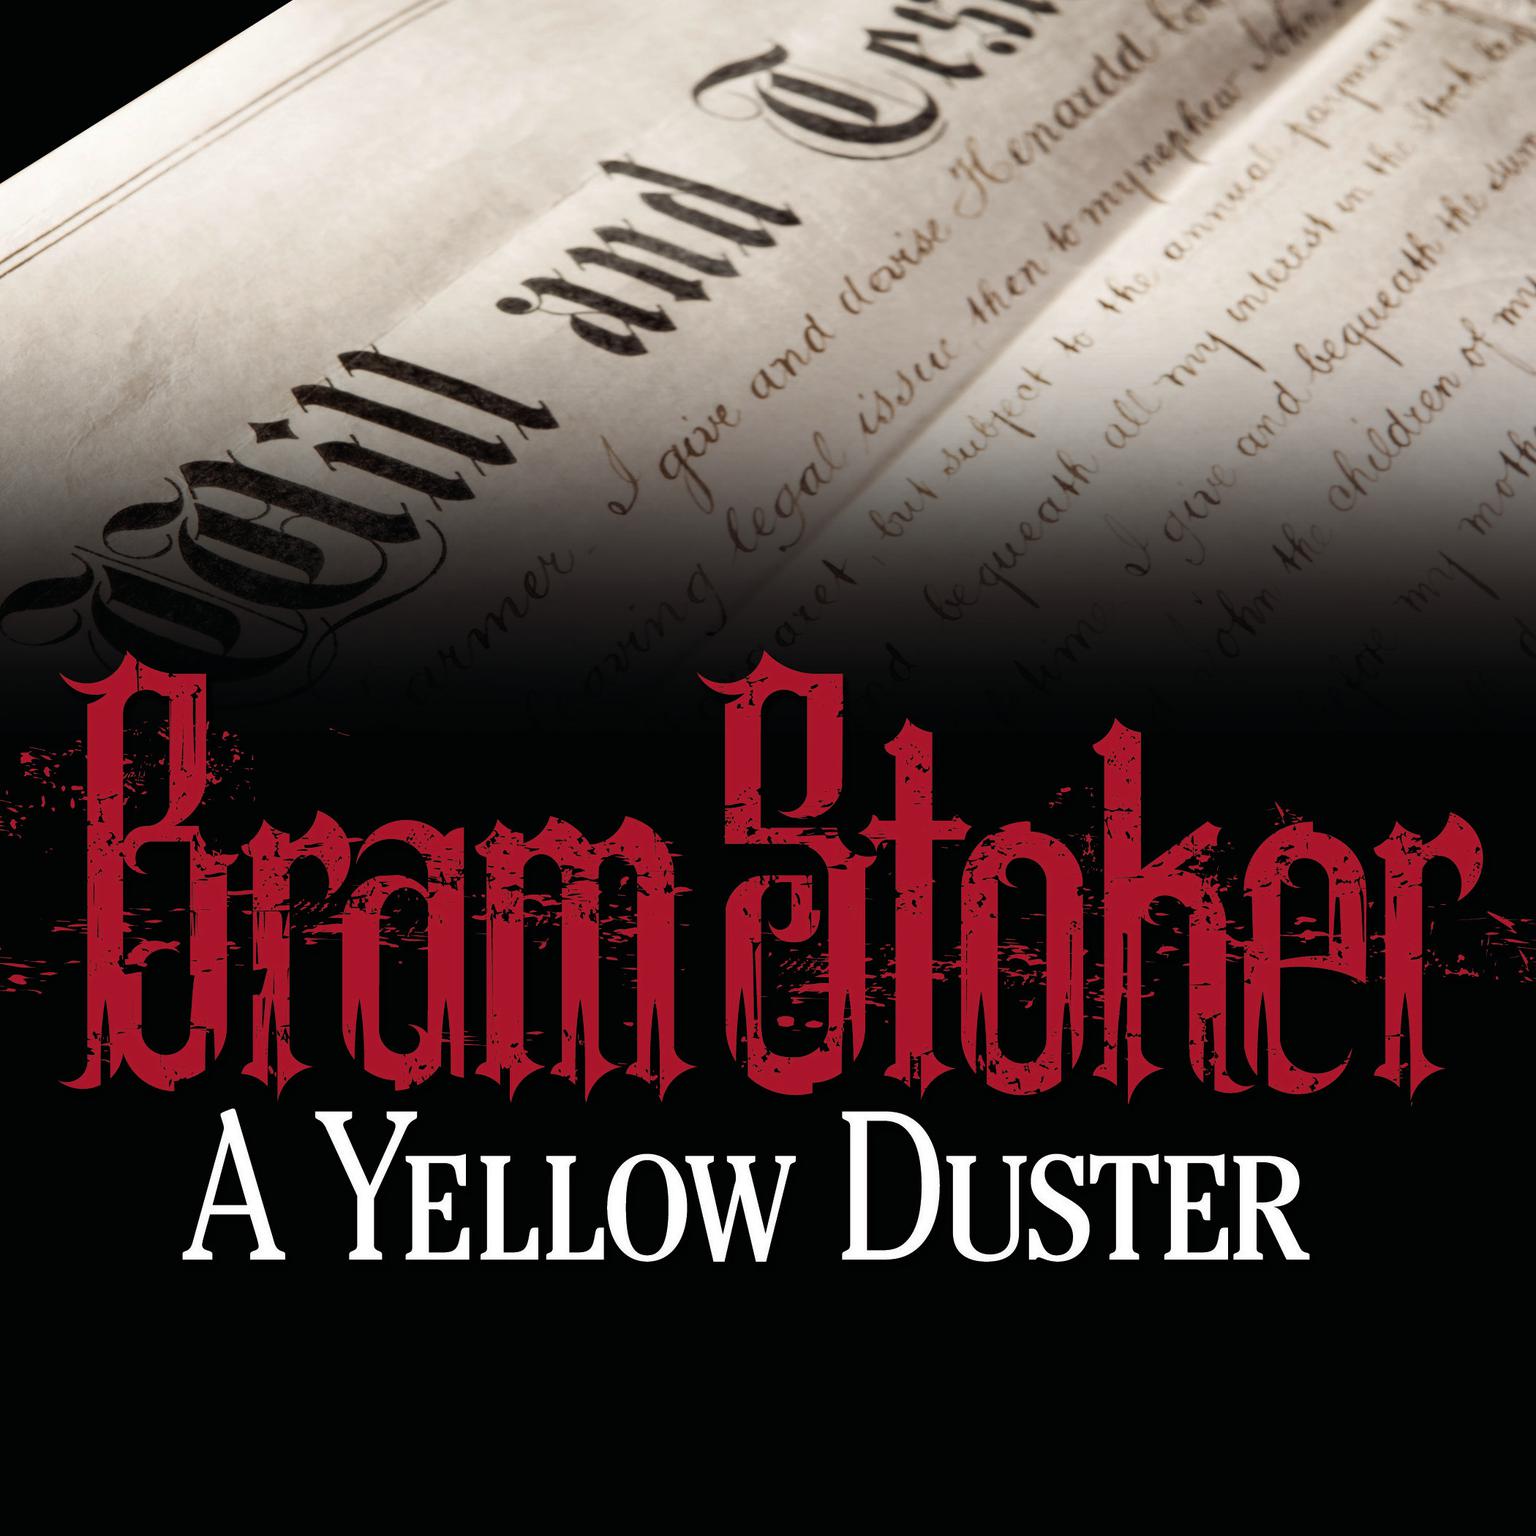 A Yellow Duster Audiobook, by Bram Stoker